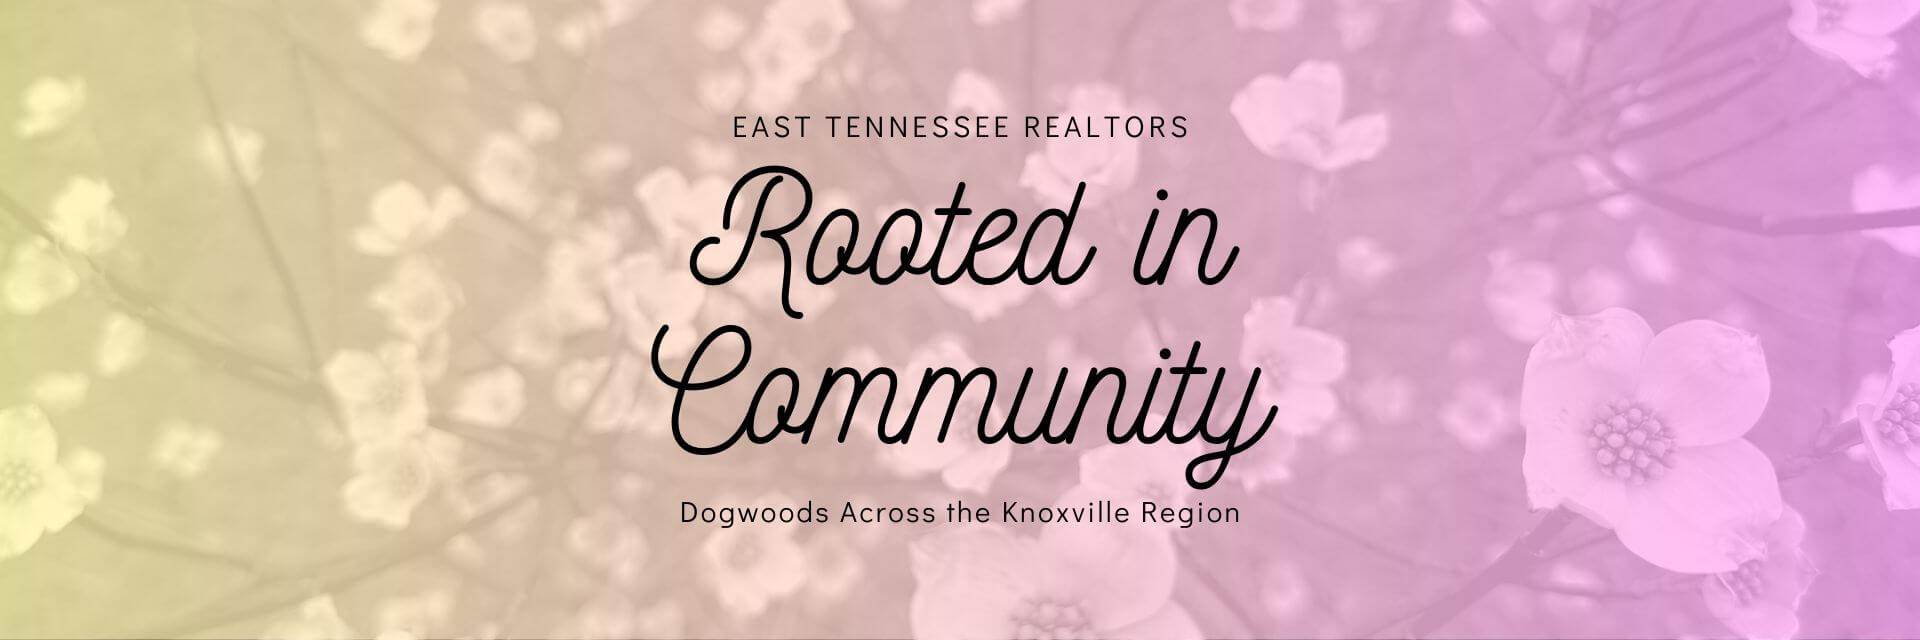 East Tennessee Realtors Rooted in Community program